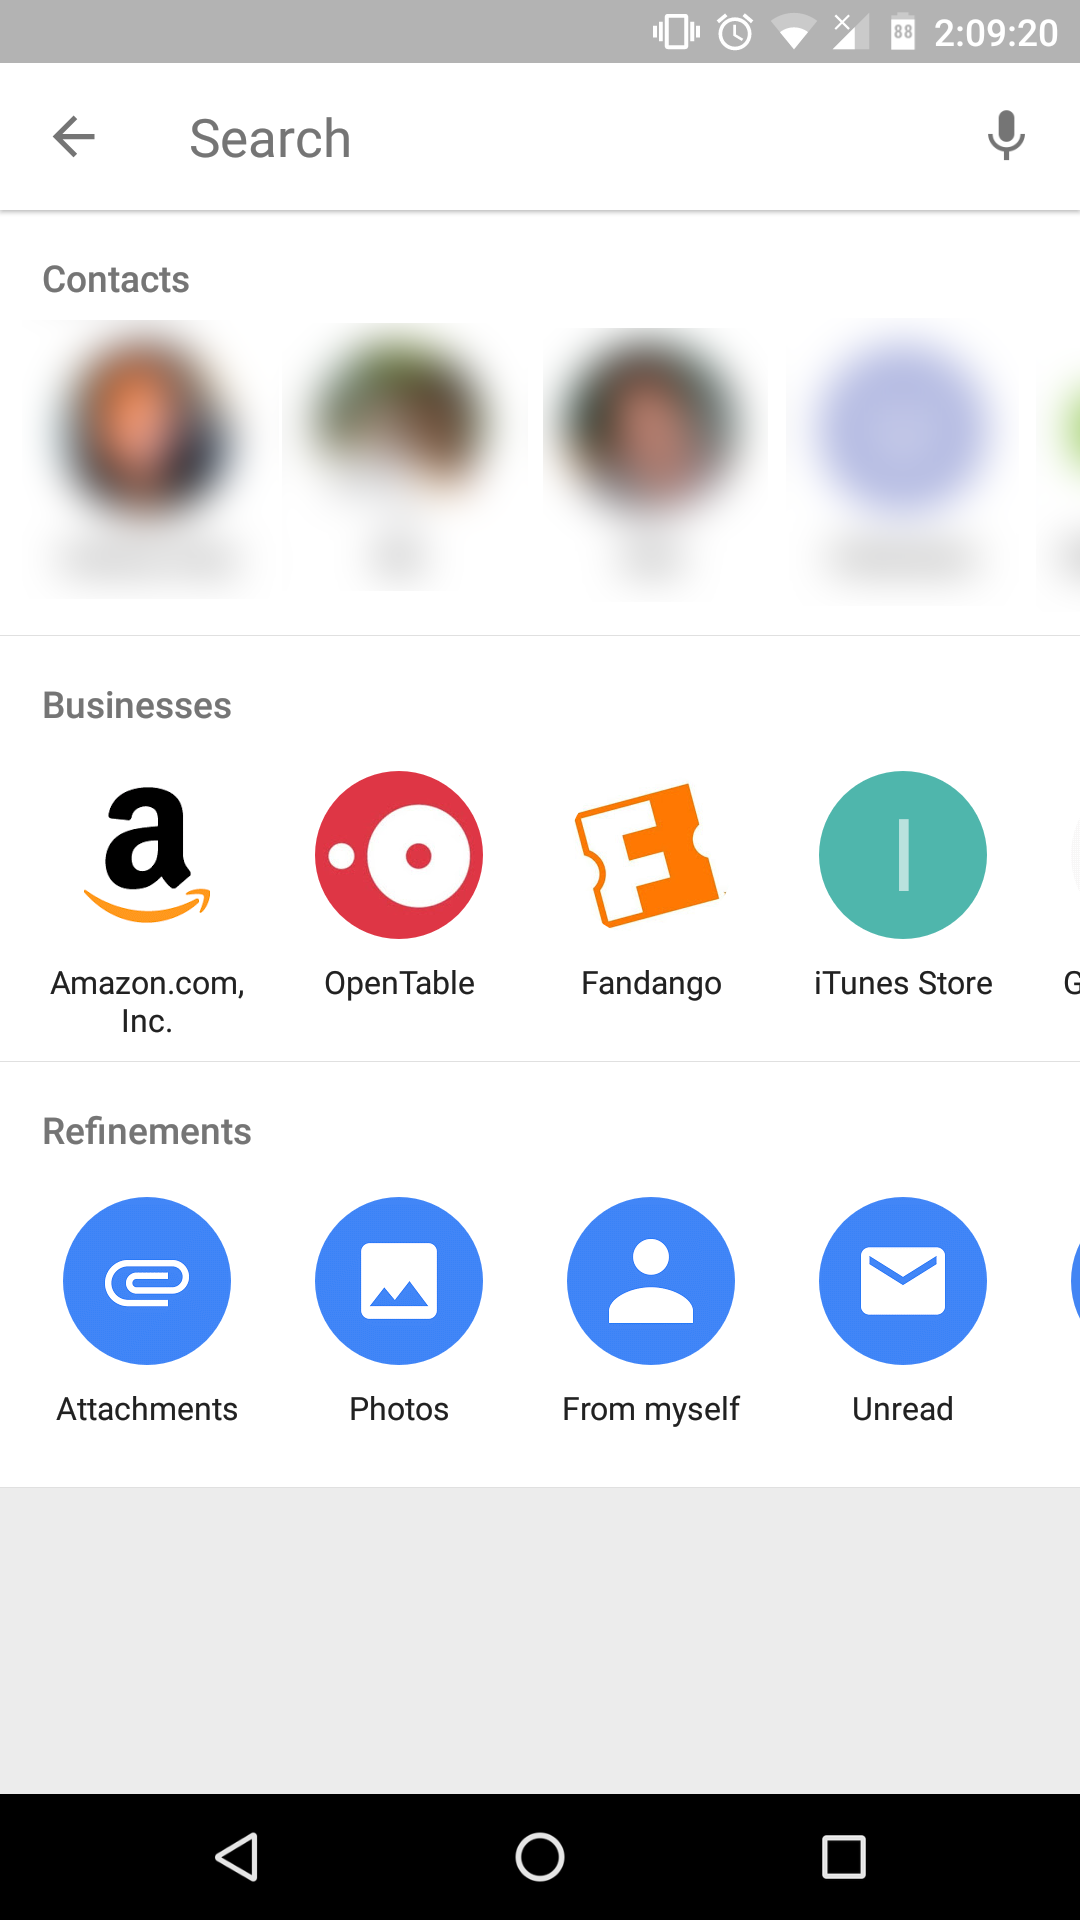 Google Inbox reportedly testing a smarter search UI